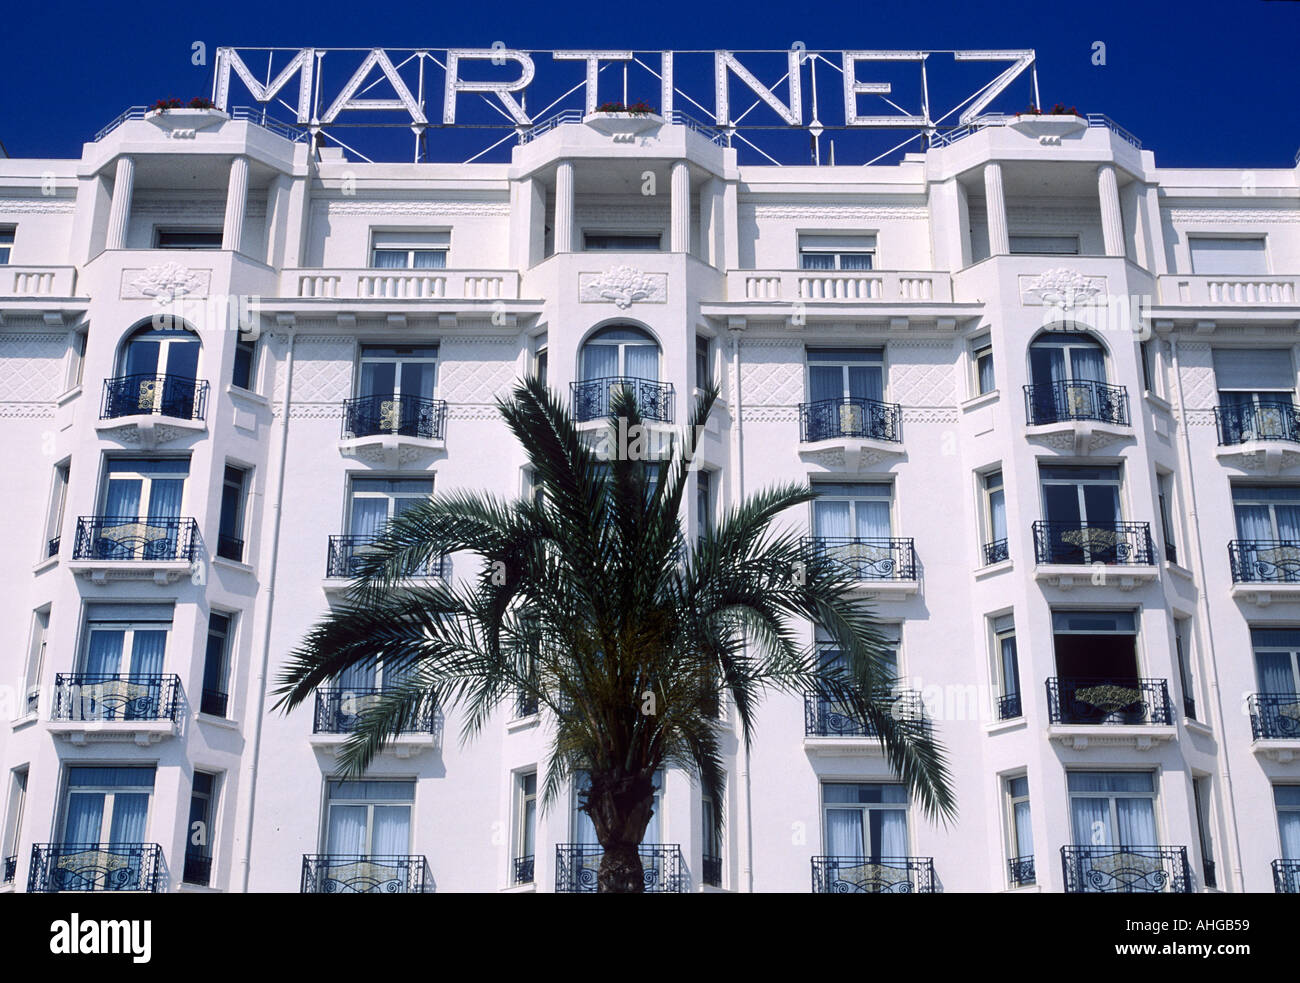 MARTINEZ PALACE IN CANNES FRENCH RIVIERA FRANCE Stock Photo